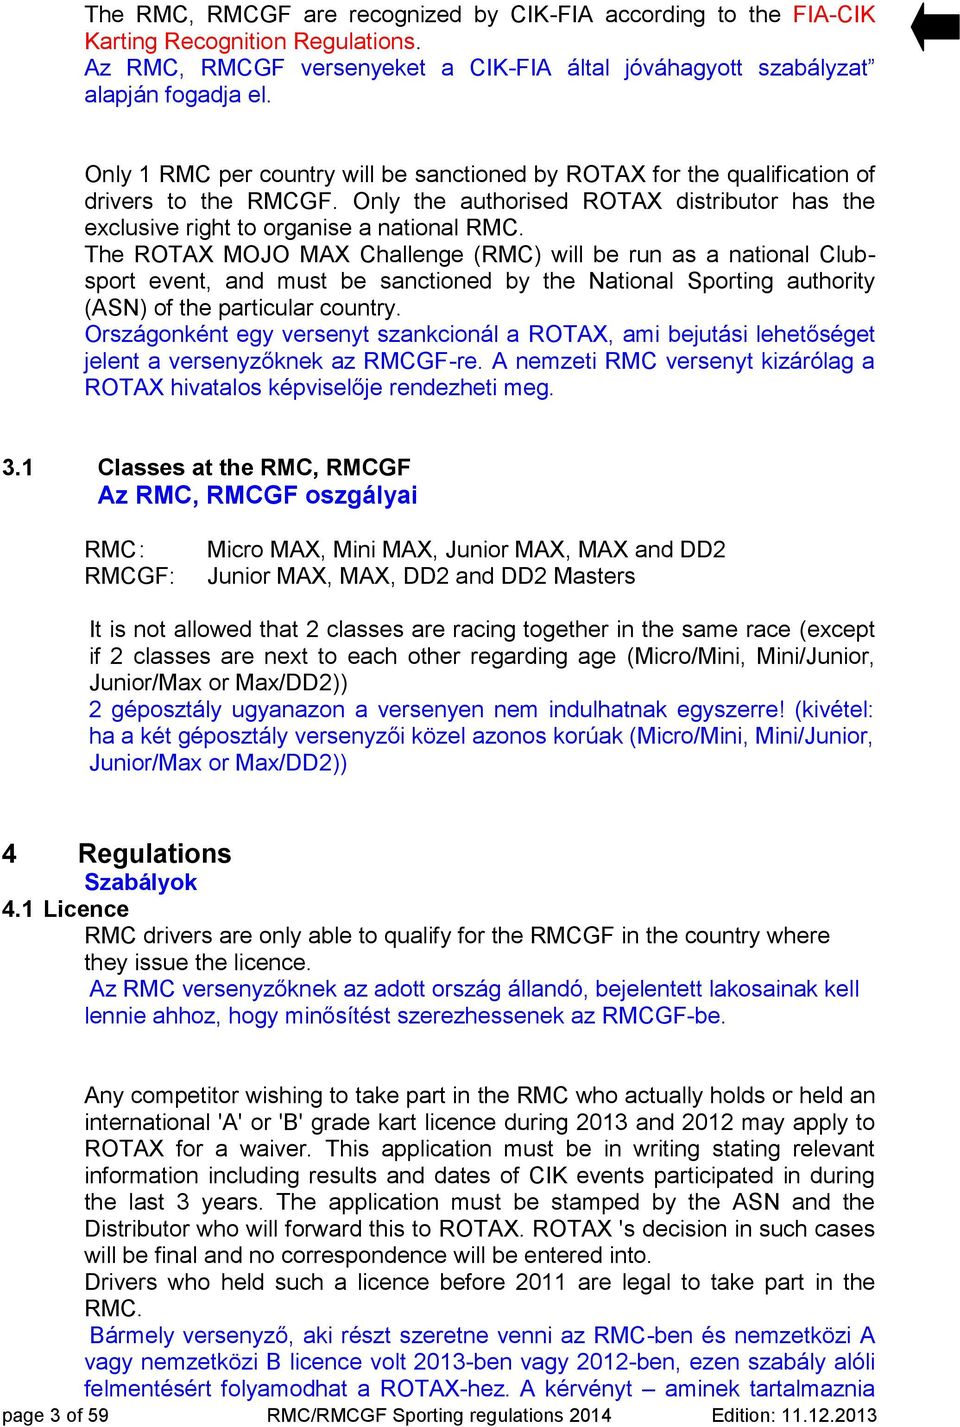 The ROTAX MOJO MAX Challenge (RMC) will be run as a national Clubsport event, and must be sanctioned by the National Sporting authority (ASN) of the particular country.